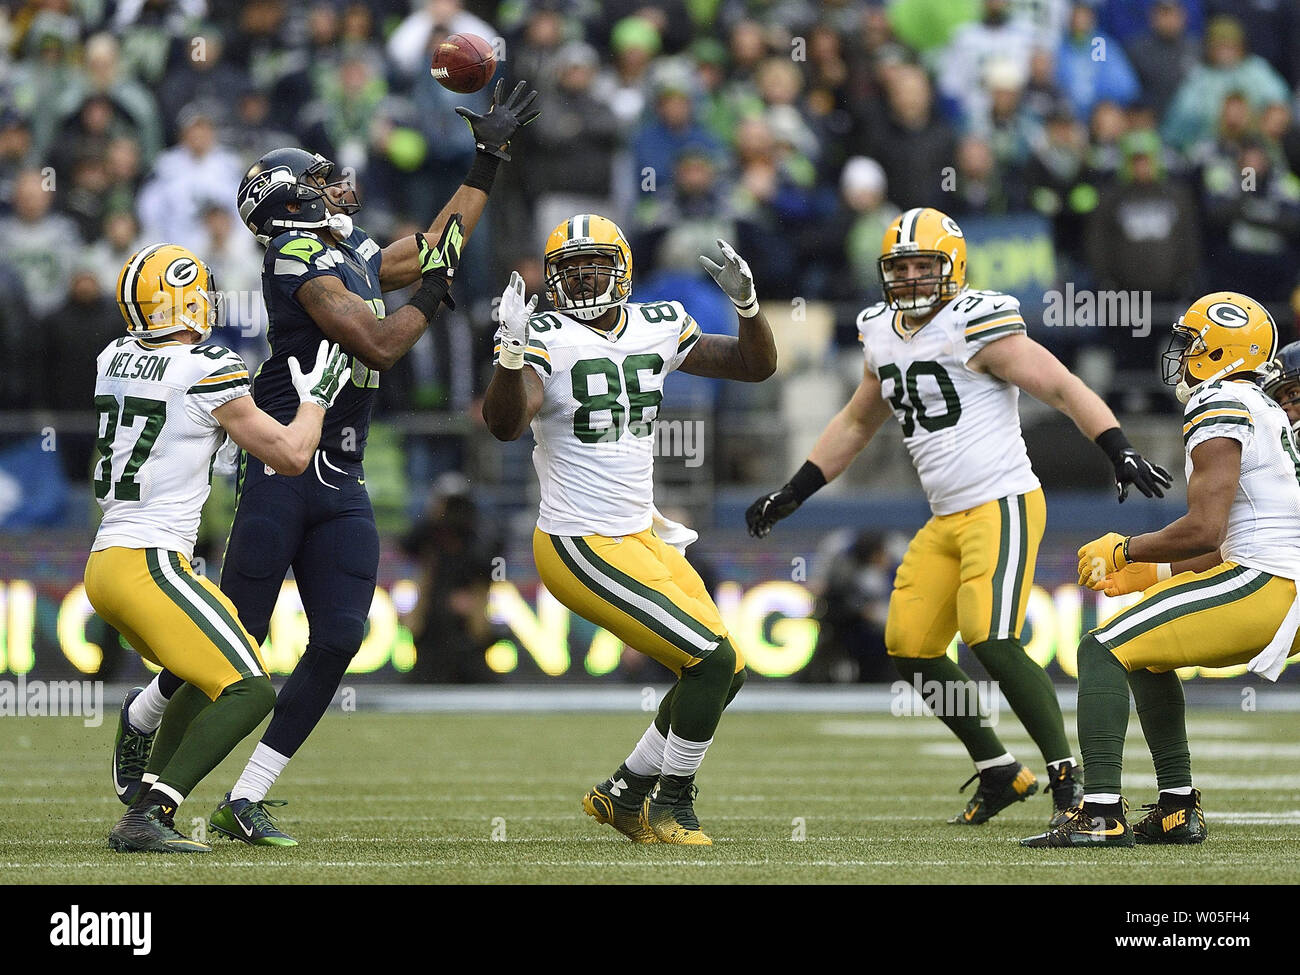 Chris Matthews (13) of the Seattle Seahawks recovers an onside kick against Jordy Nelson (87), Brandon Bostick (86), and John Kuhn (30) of the Green Bay Packers  in the NFC Championship game at CenturyLink Field in Seattle, Washington on January 18, 2015.  Seattle won 28-22. Photo by Troy Wayrynen/UPI Stock Photo